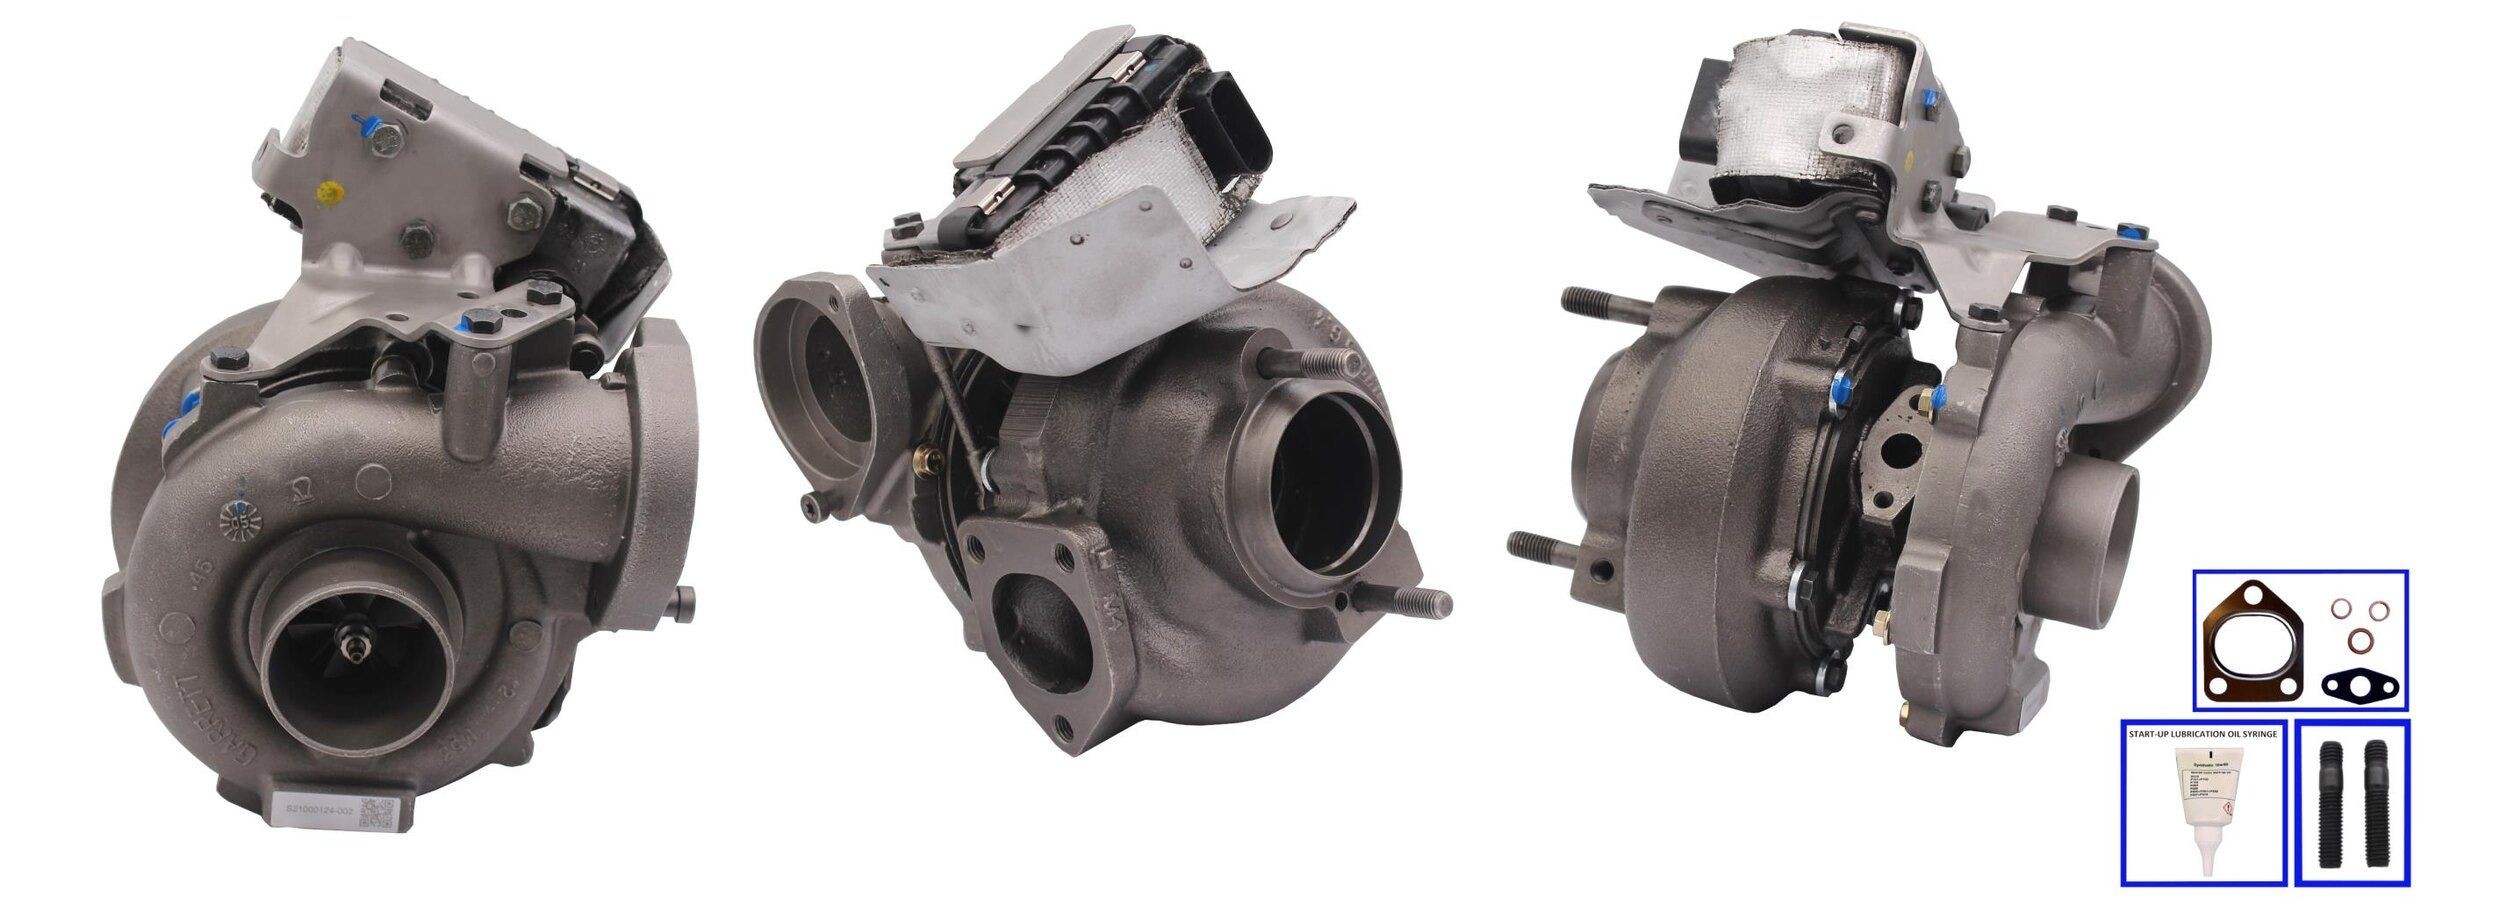 LTRPA75008018 LUCAS Turbocharger BMW Exhaust Turbocharger, Electrically controlled actuator, with gaskets/seals